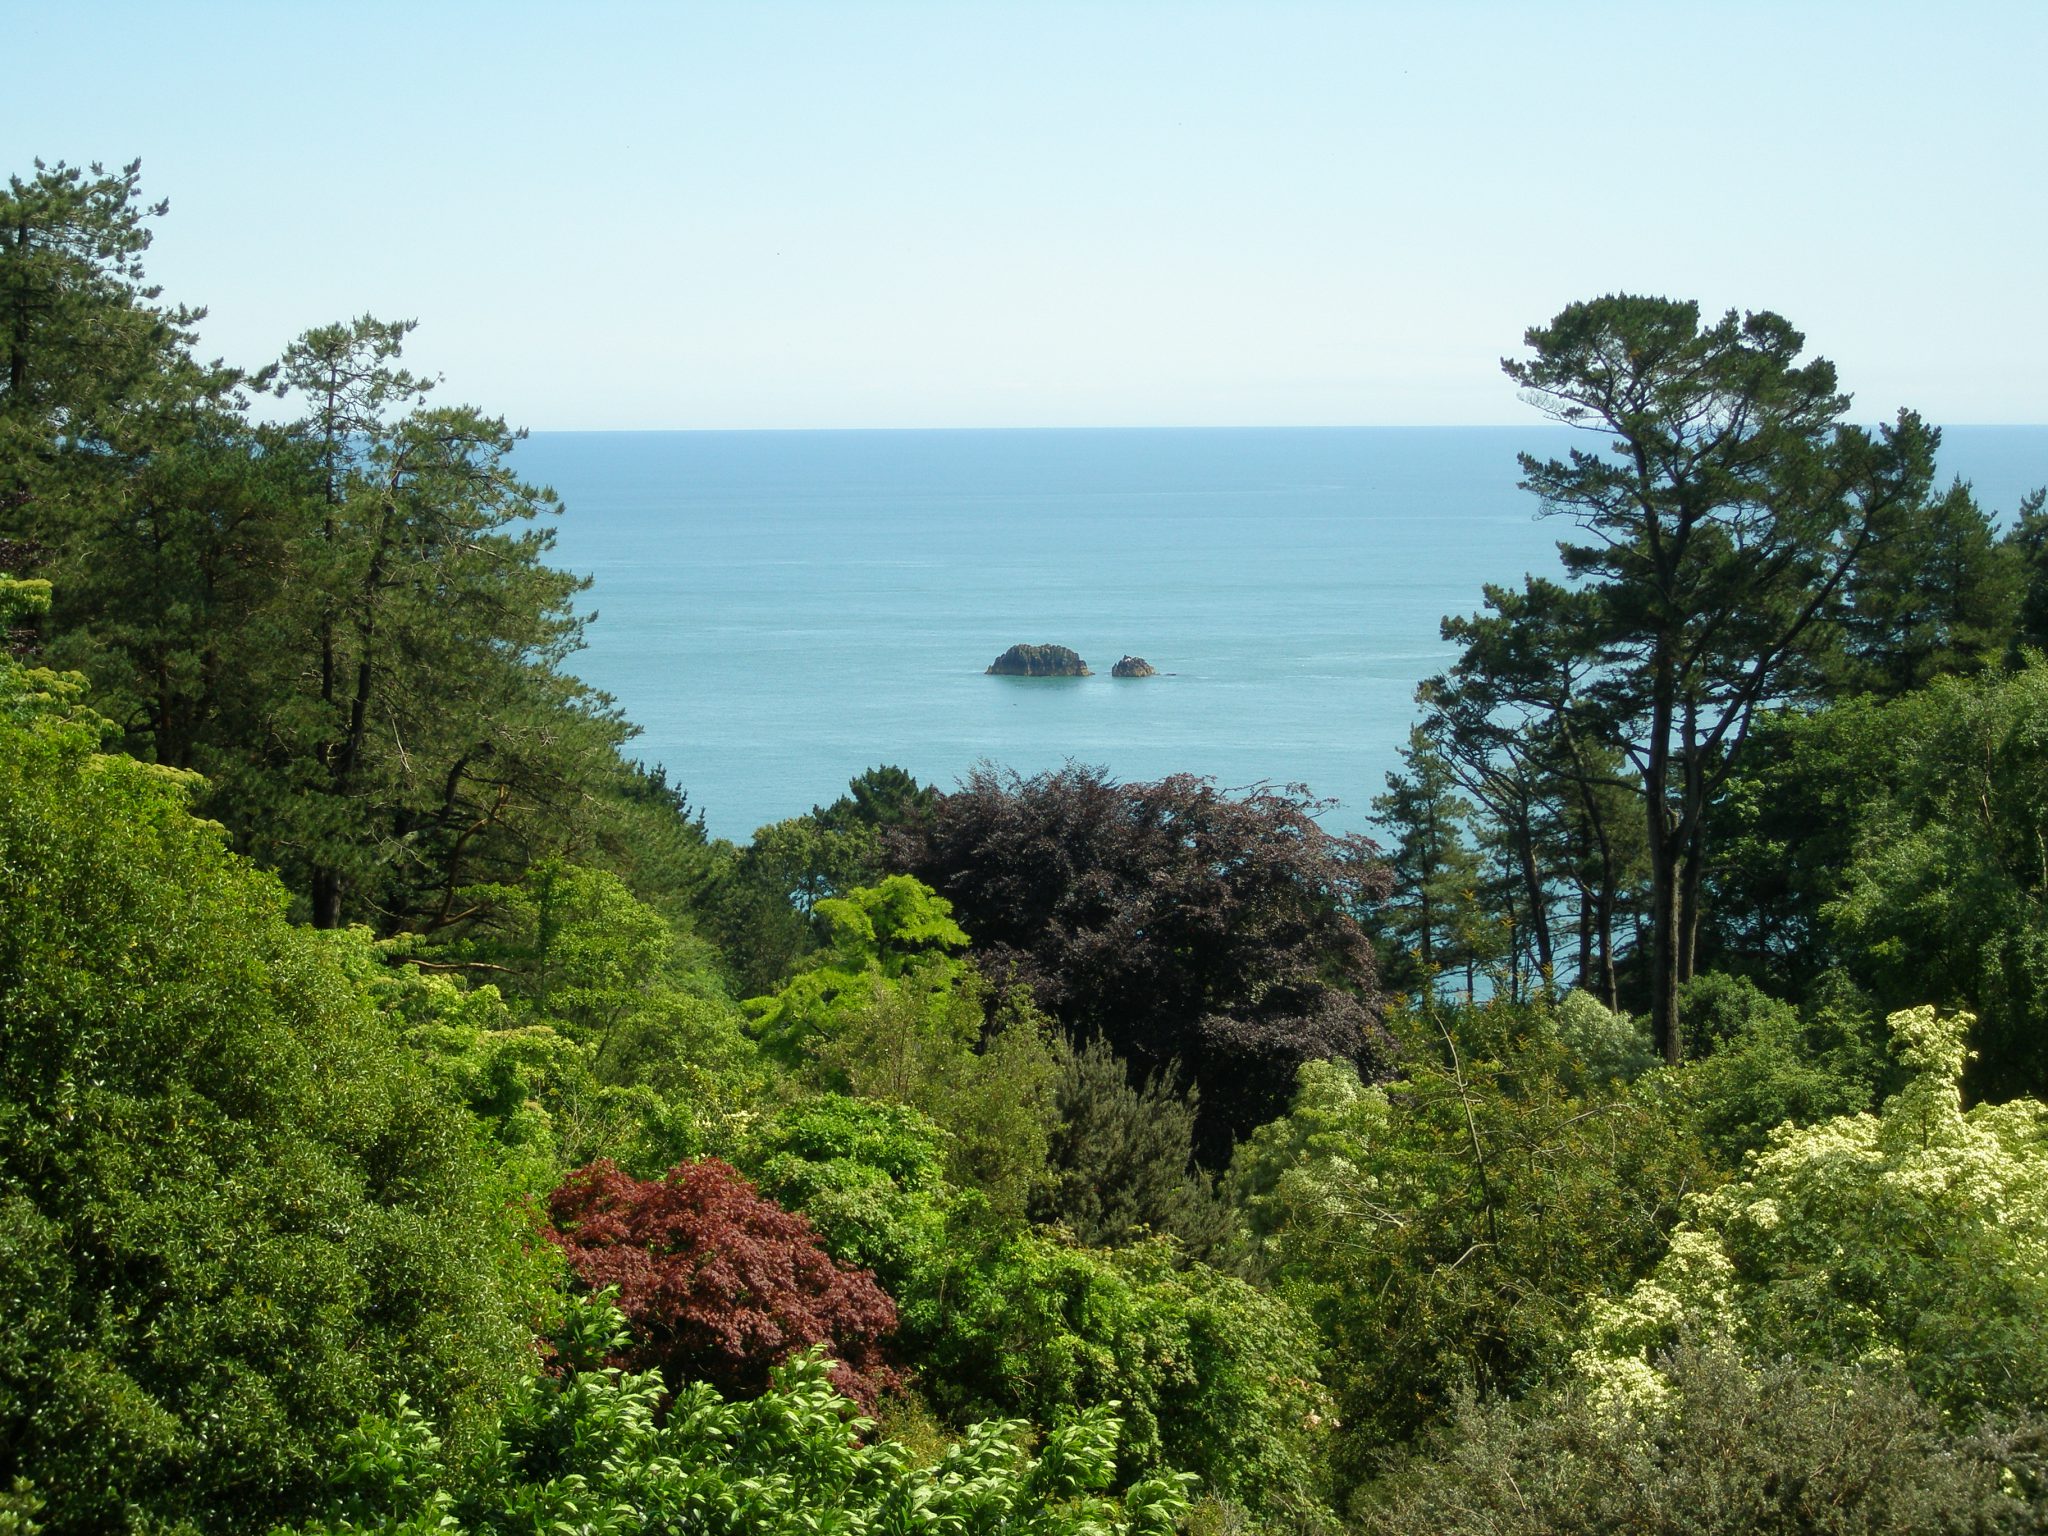 My final view of the English Channel, from the Gazebo at Coleton Fishacre.